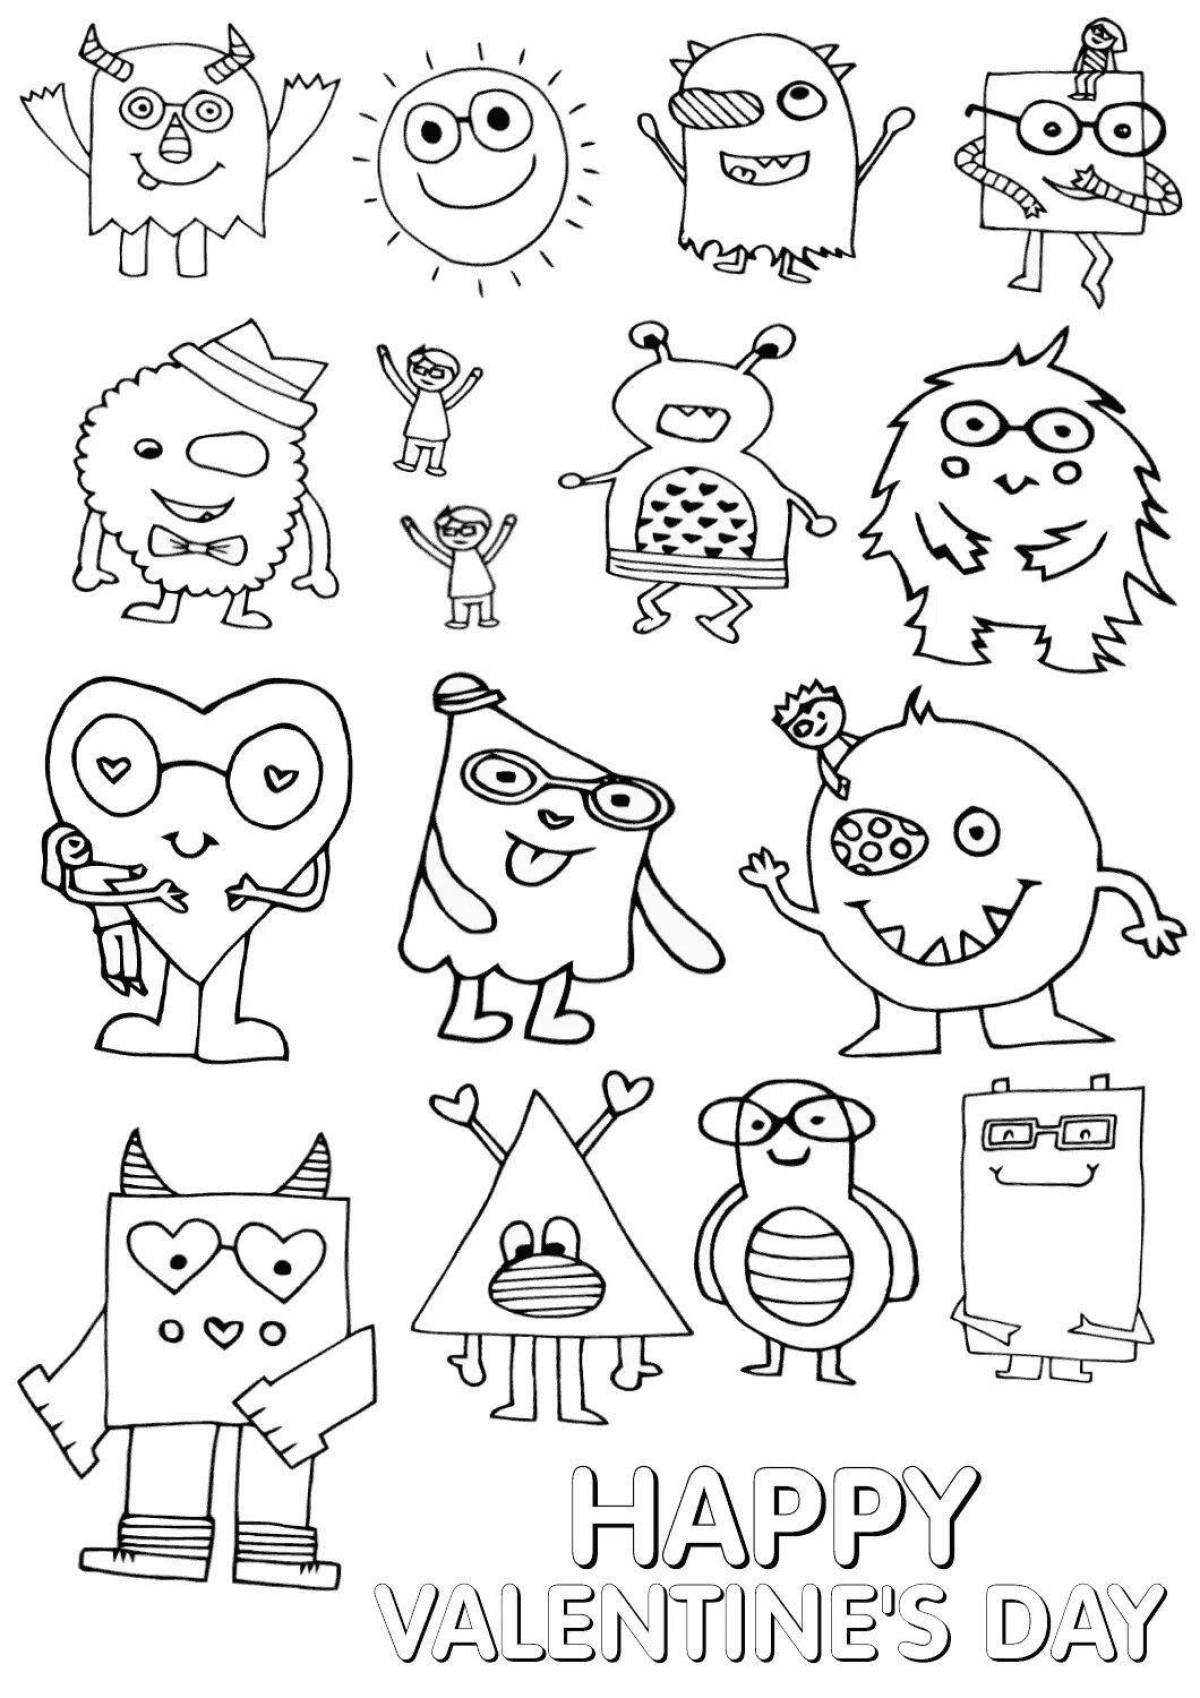 Fabulous sticker printable coloring pages